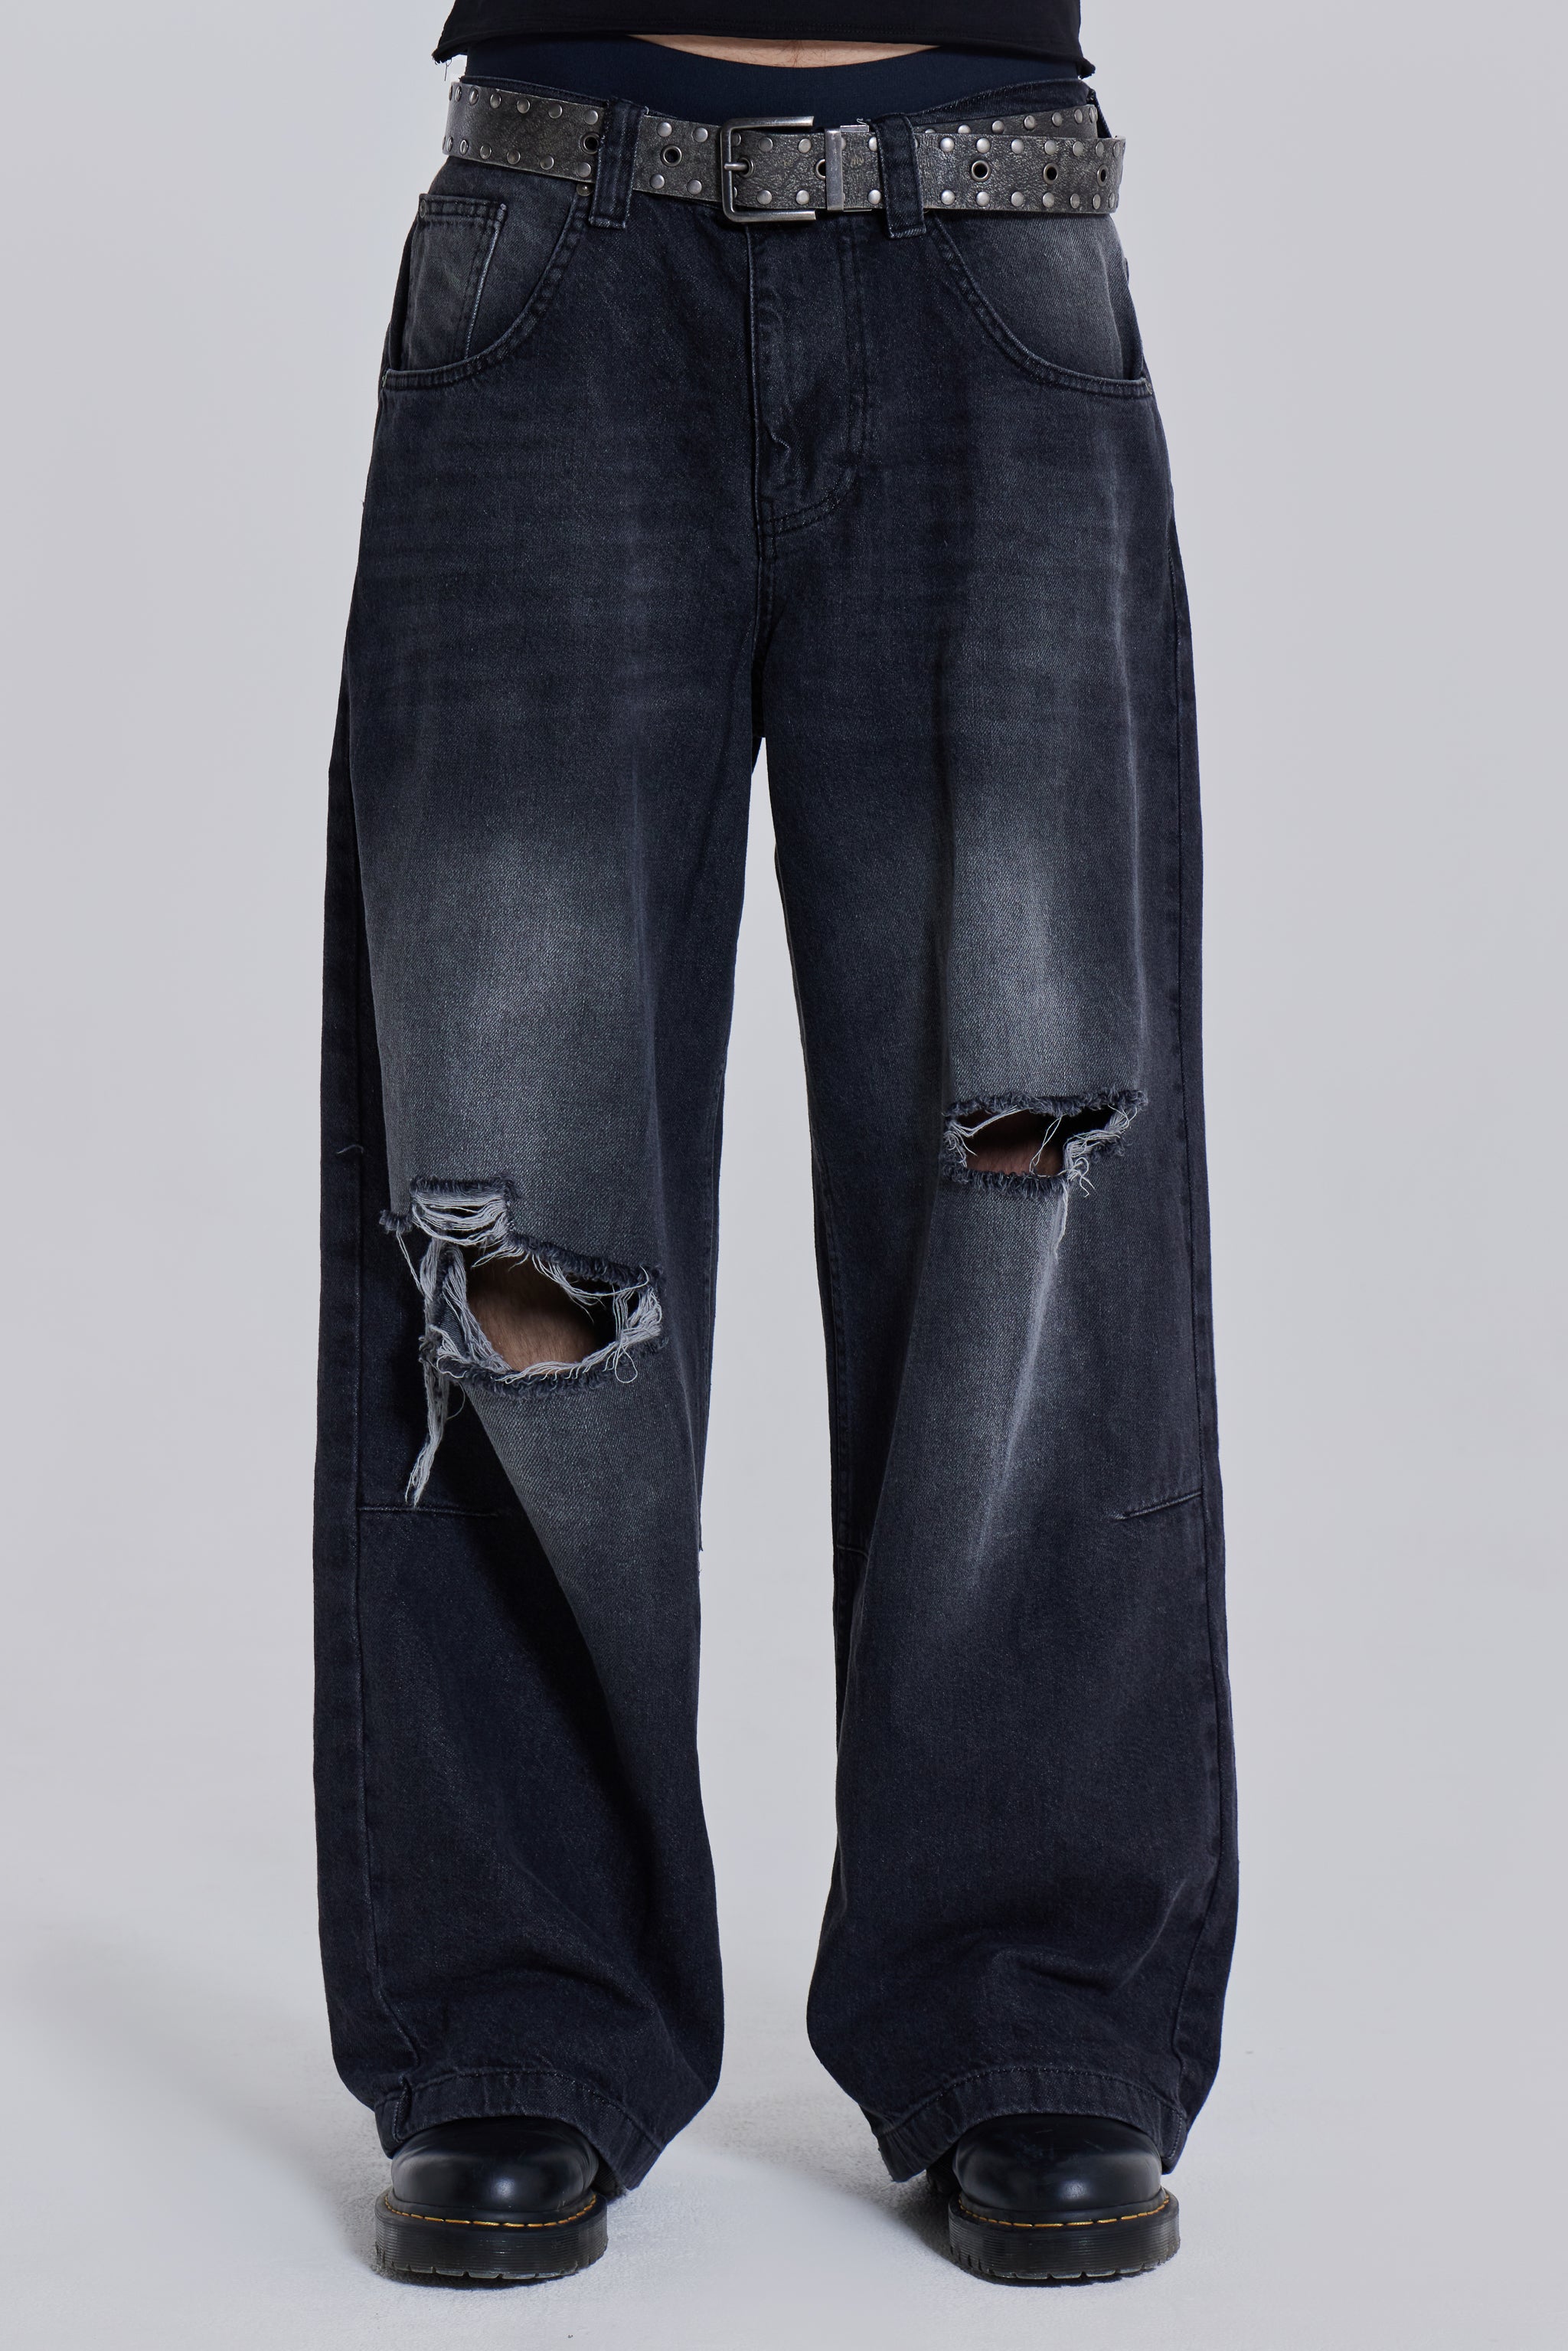 JADED LONDON WASHED BLACK COLOSSUS JEANS - デニム/ジーンズ